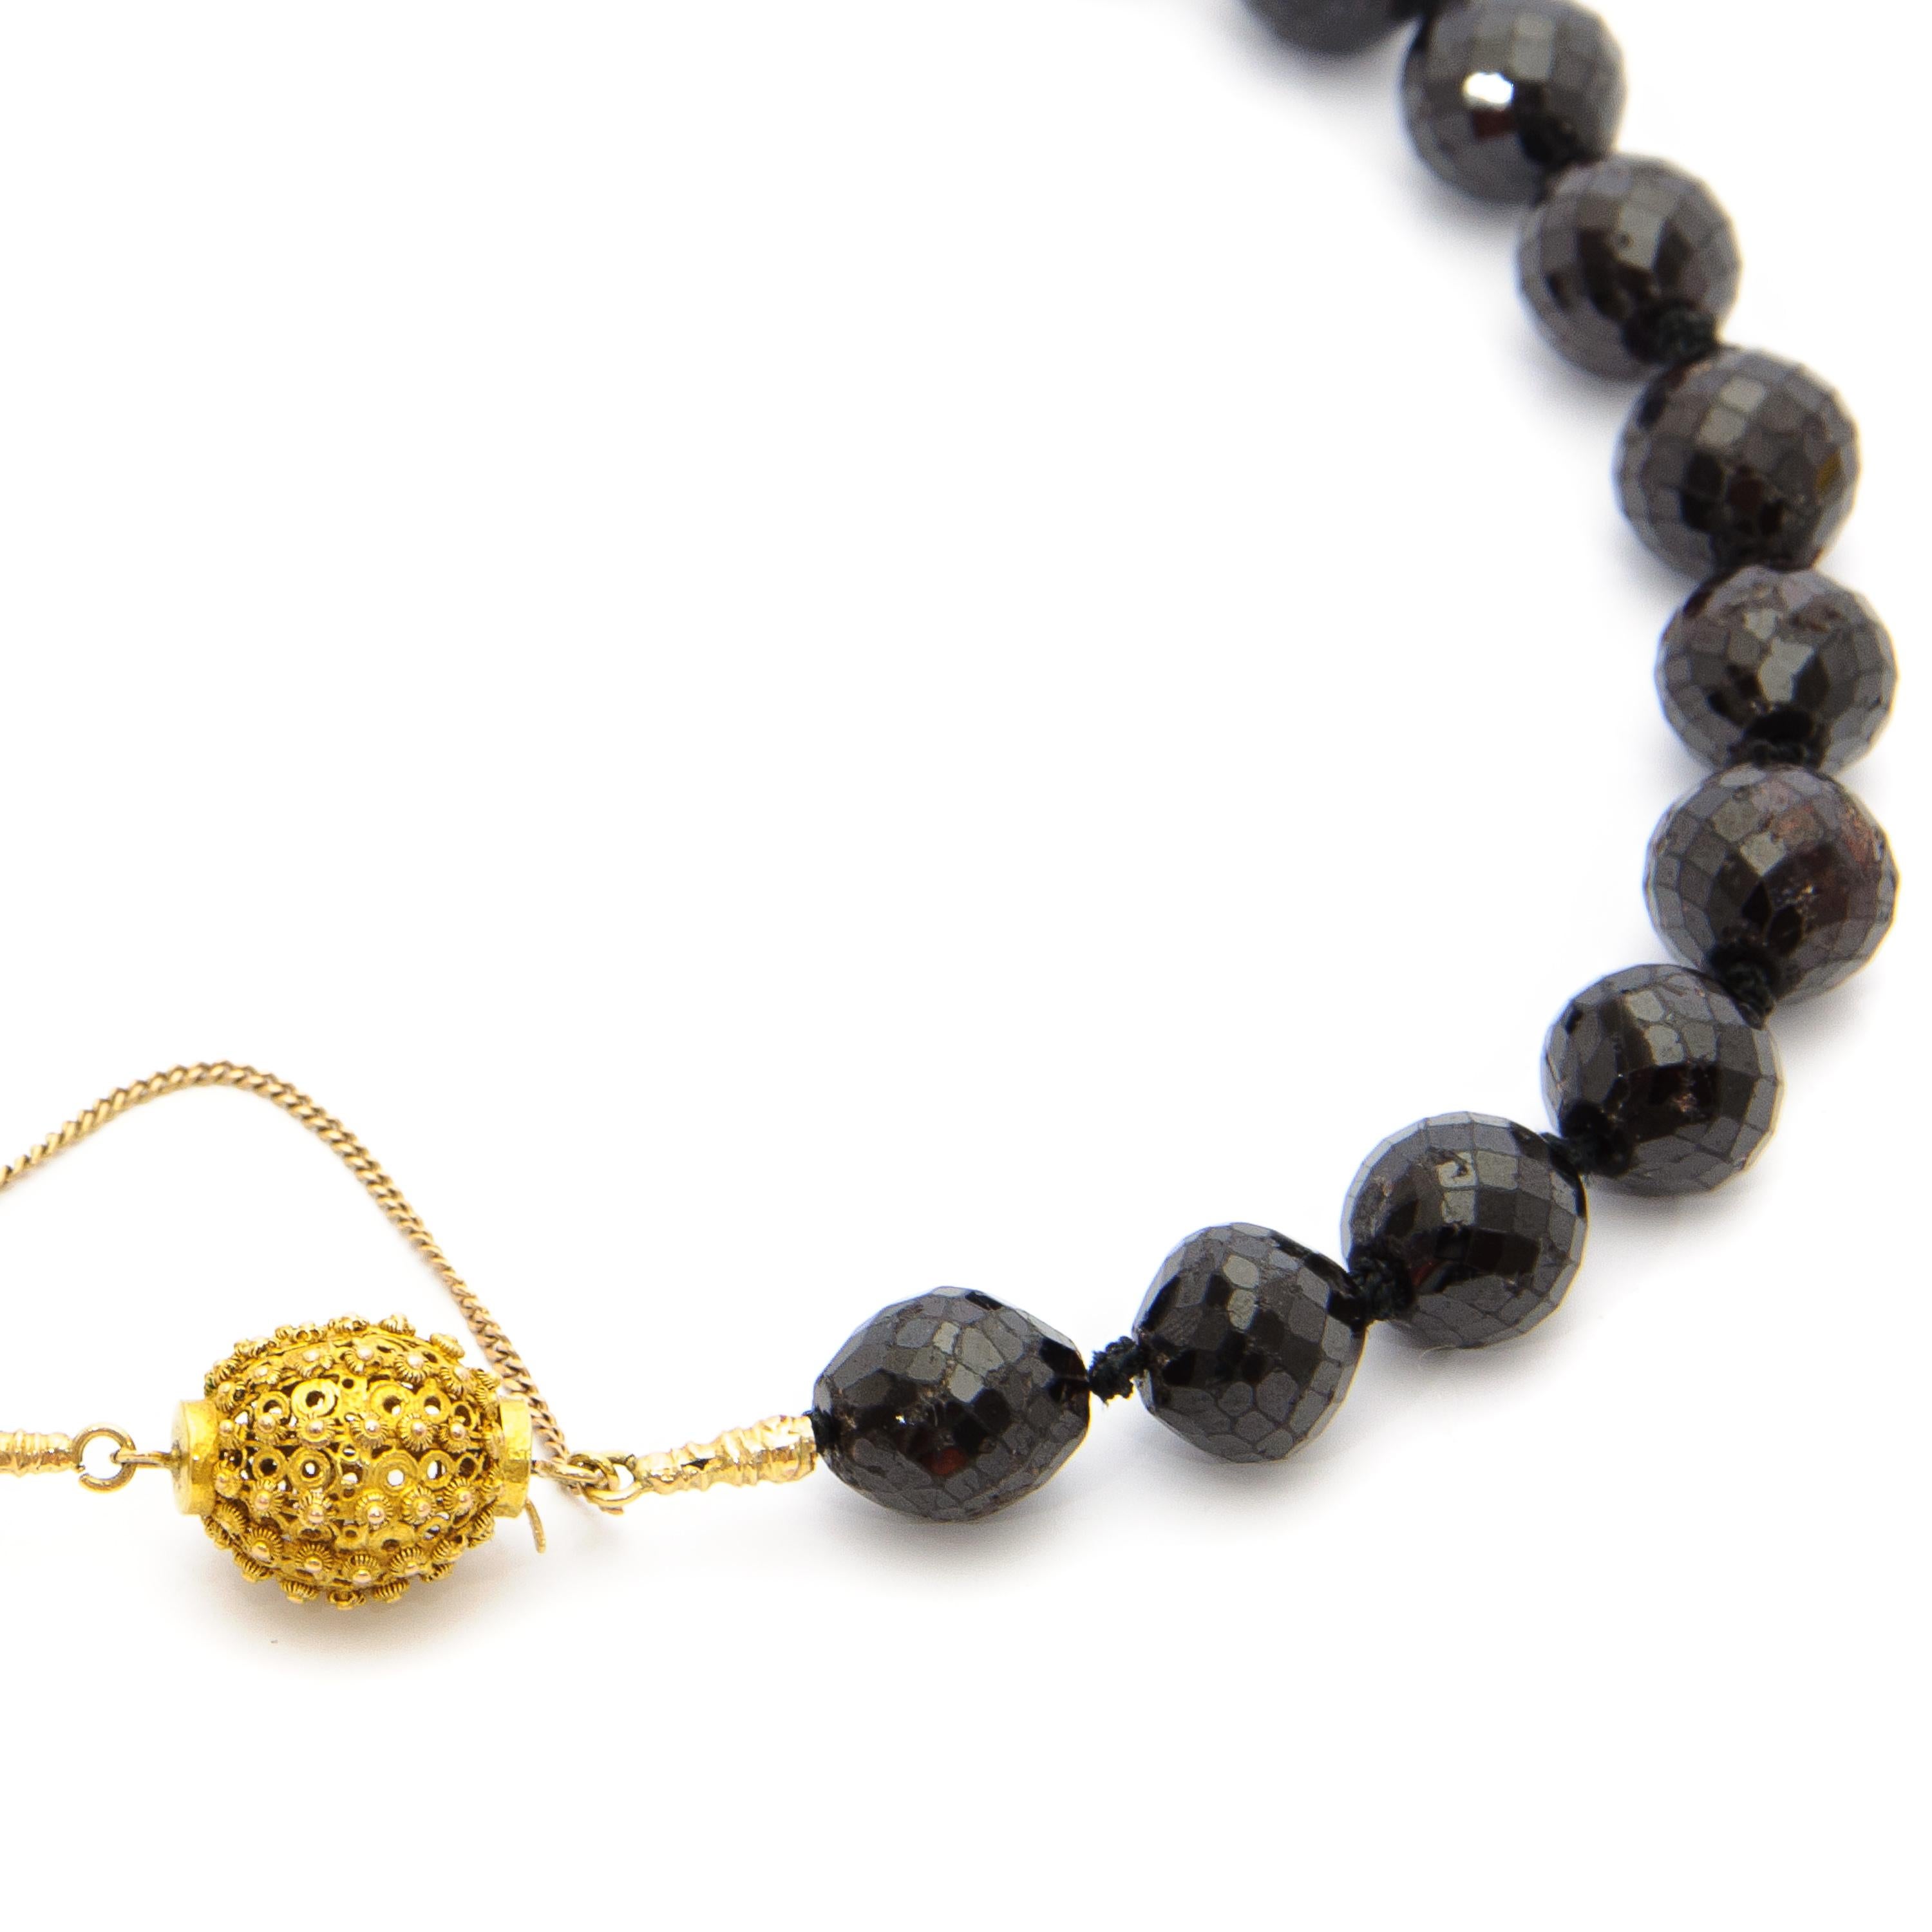 A 14 karat gold garnet necklace made of 27 round faceted garnets. The garnets have a diameter of approximately 1.4 centimeter, which are strung on a gold thread string from the lock. Between each garnet bead, the black thread is nicely knotted, to